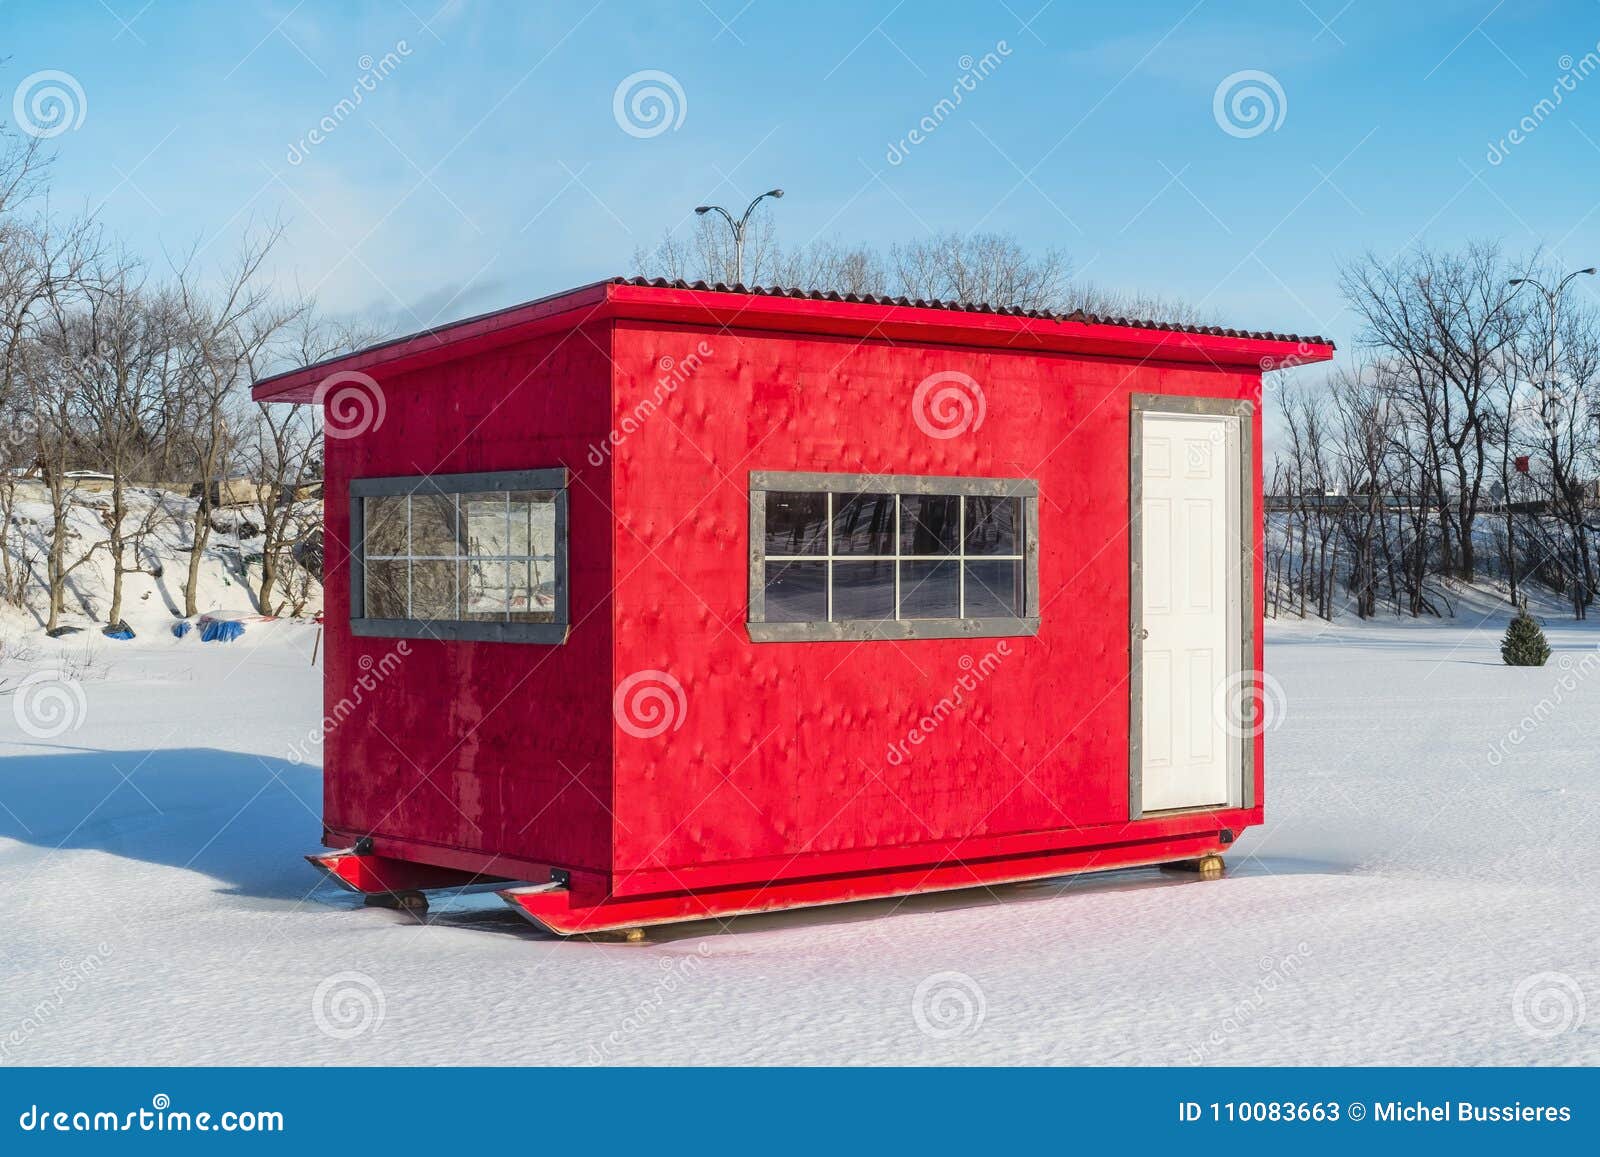 https://thumbs.dreamstime.com/z/red-ice-fishing-cabin-ste-rose-ice-fishing-cabins-bench-snowman-vast-spaces-frozen-rivi%C3%A8re-des-mille-%C3%AEles-110083663.jpg